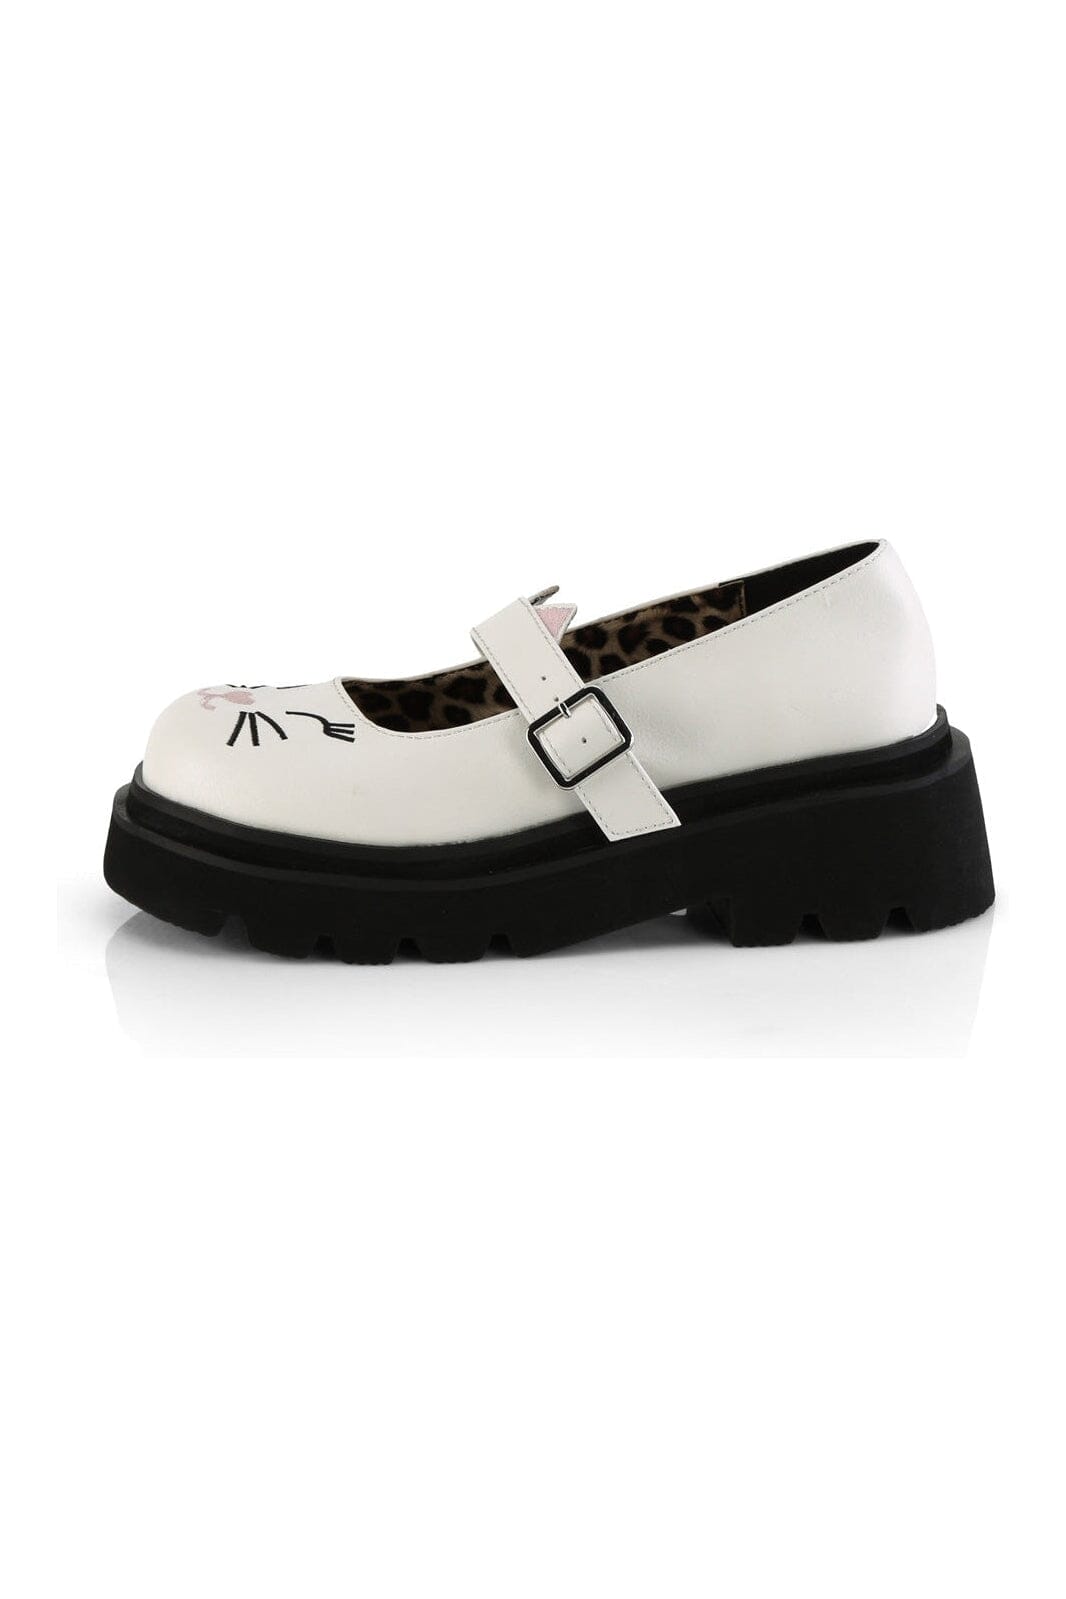 RENEGADE-56 White Vegan Leather Mary Janes-Mary Janes-Demonia-SEXYSHOES.COM